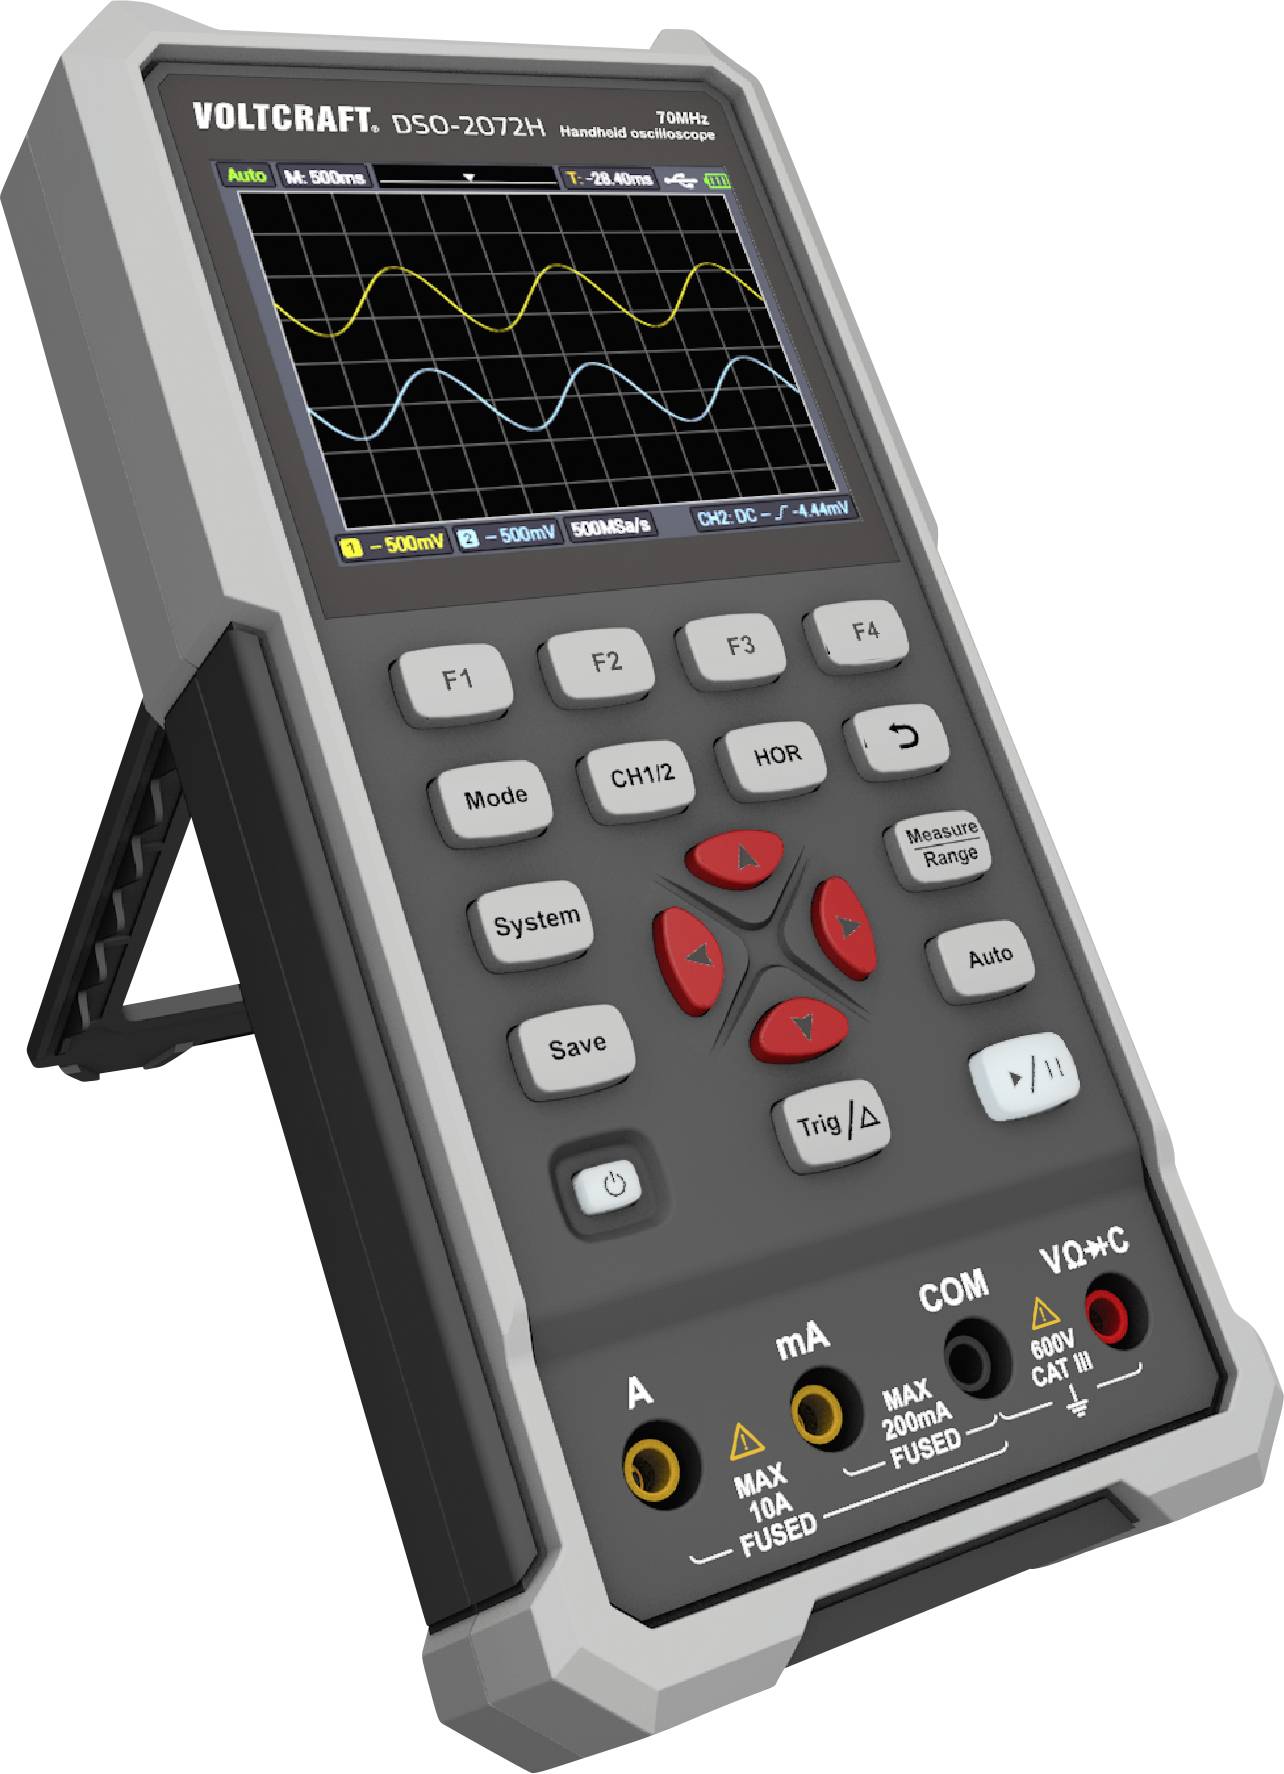 Buy VOLTCRAFT DSO-2072H Handheld oscilloscope 70 MHz 2-channel 250